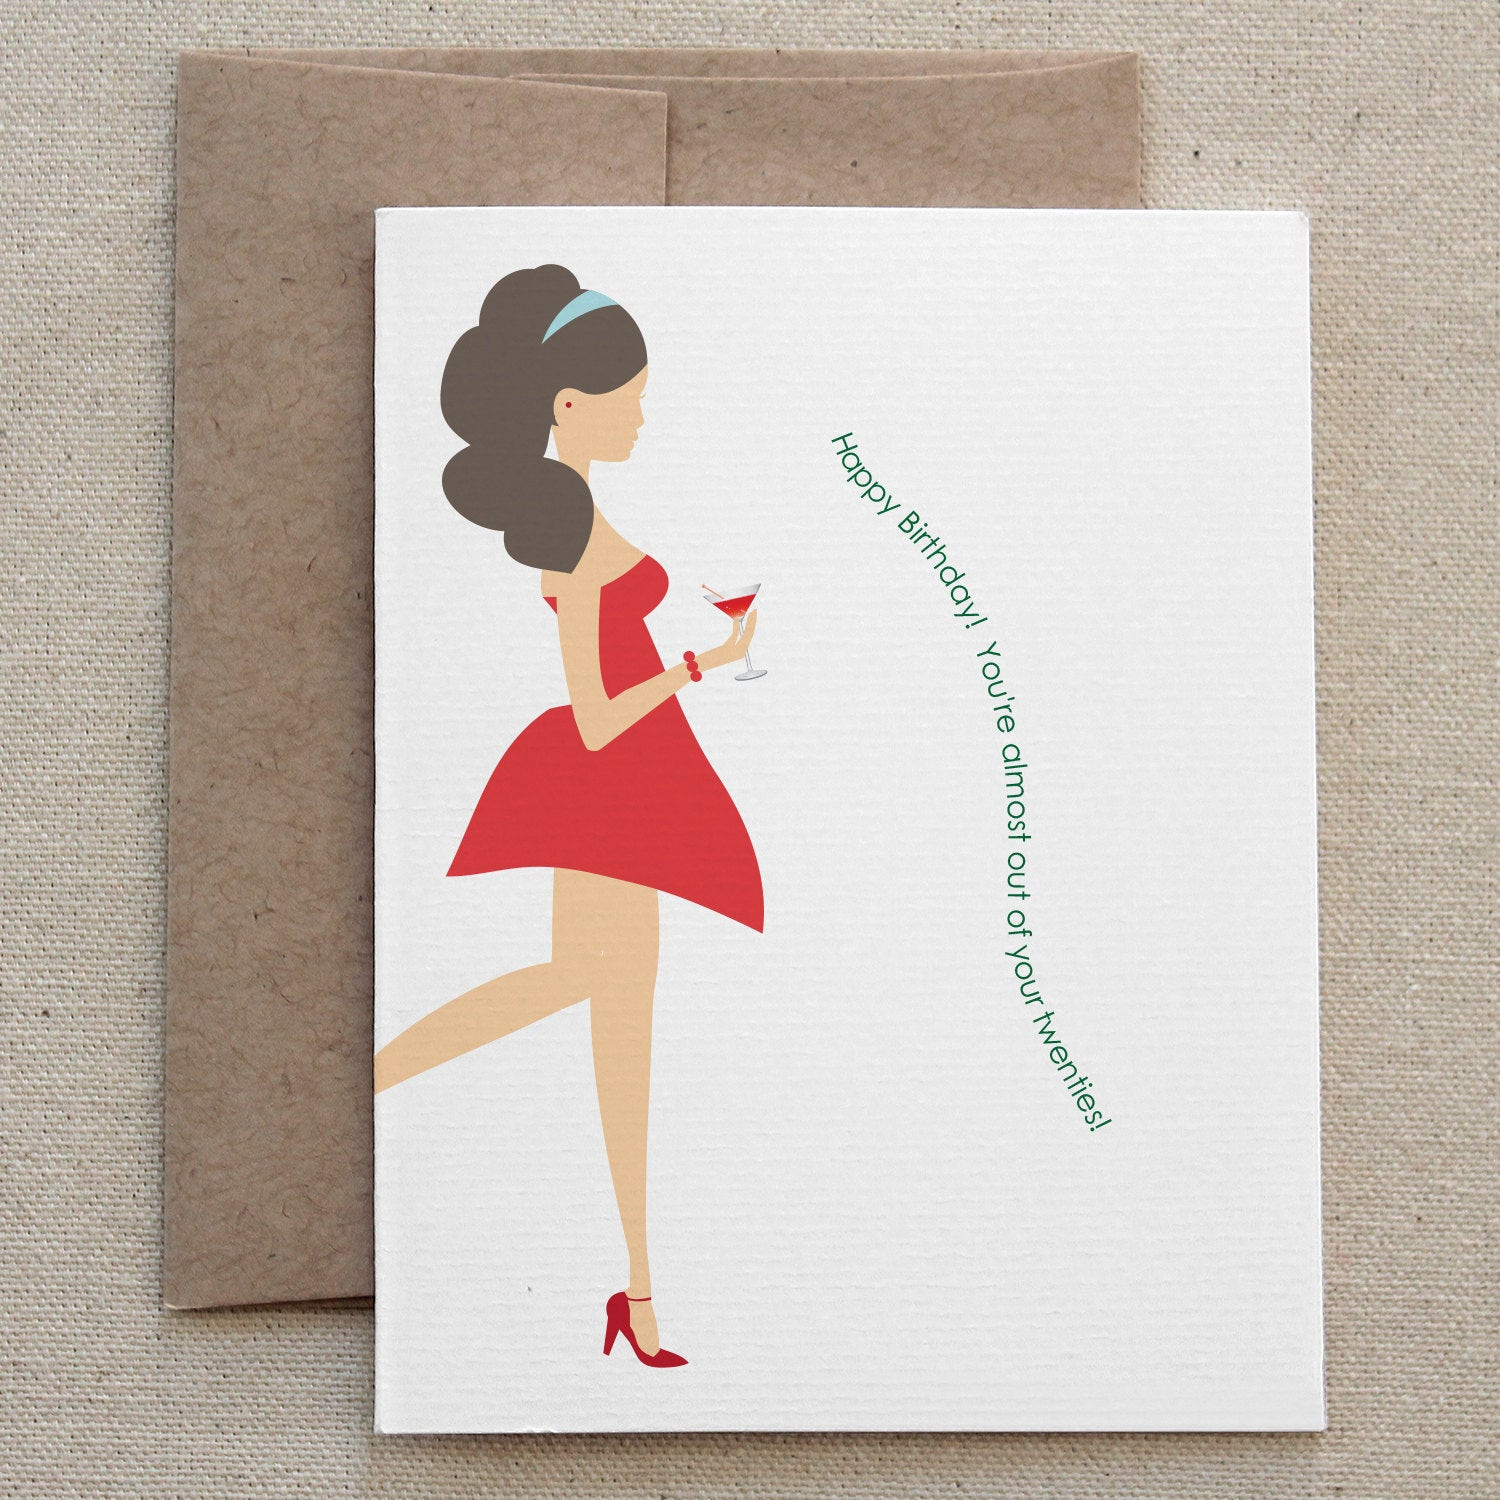 Funny Birthday Cards For Her
 Funny Birthday Card Snarky Sarcastic For Woman Her